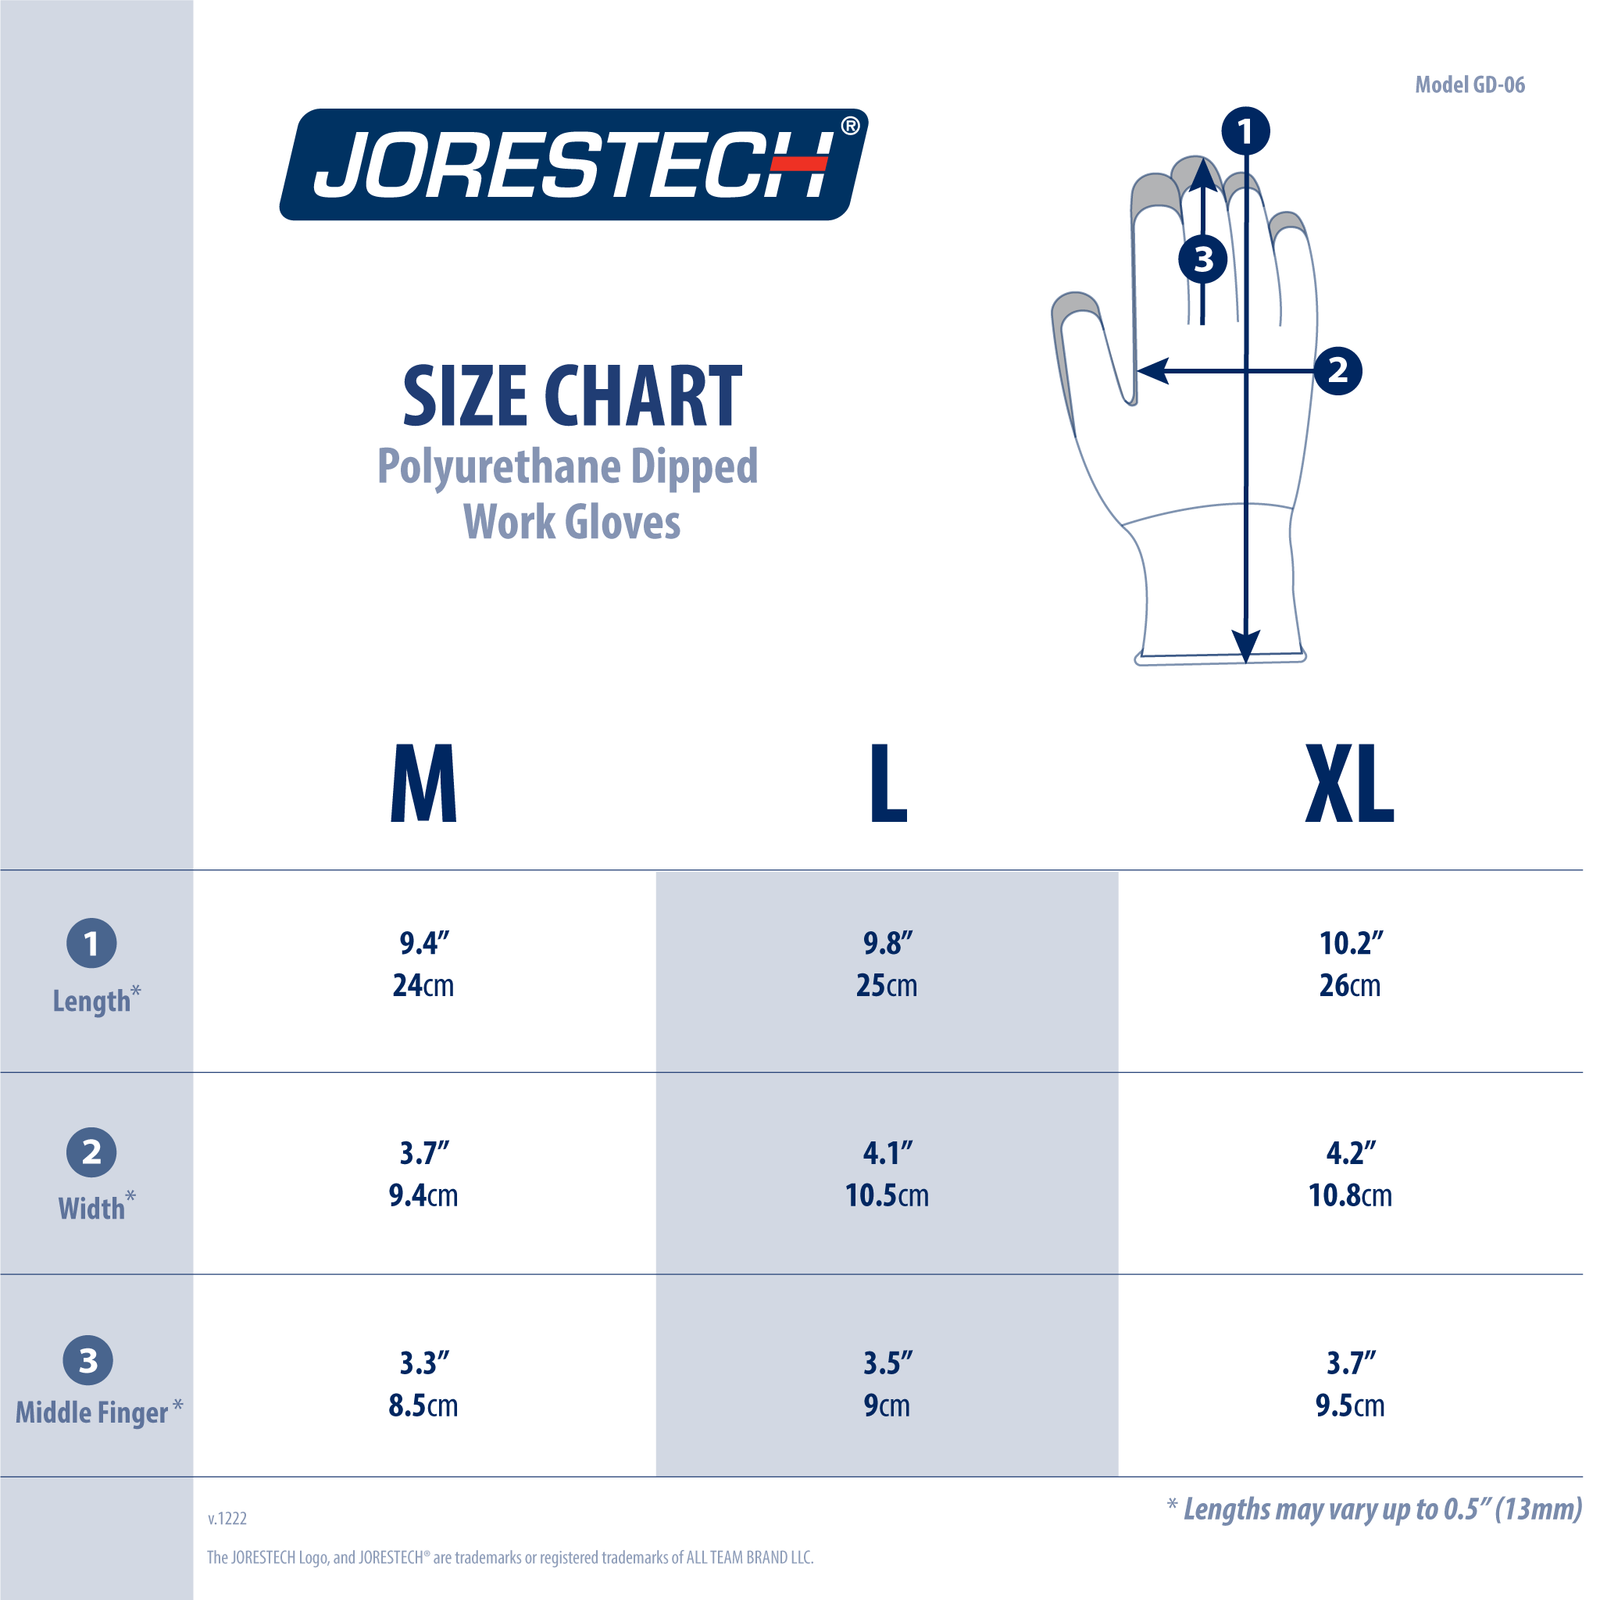 Size chart of the JORESTECH polyurethane dipped safety glove